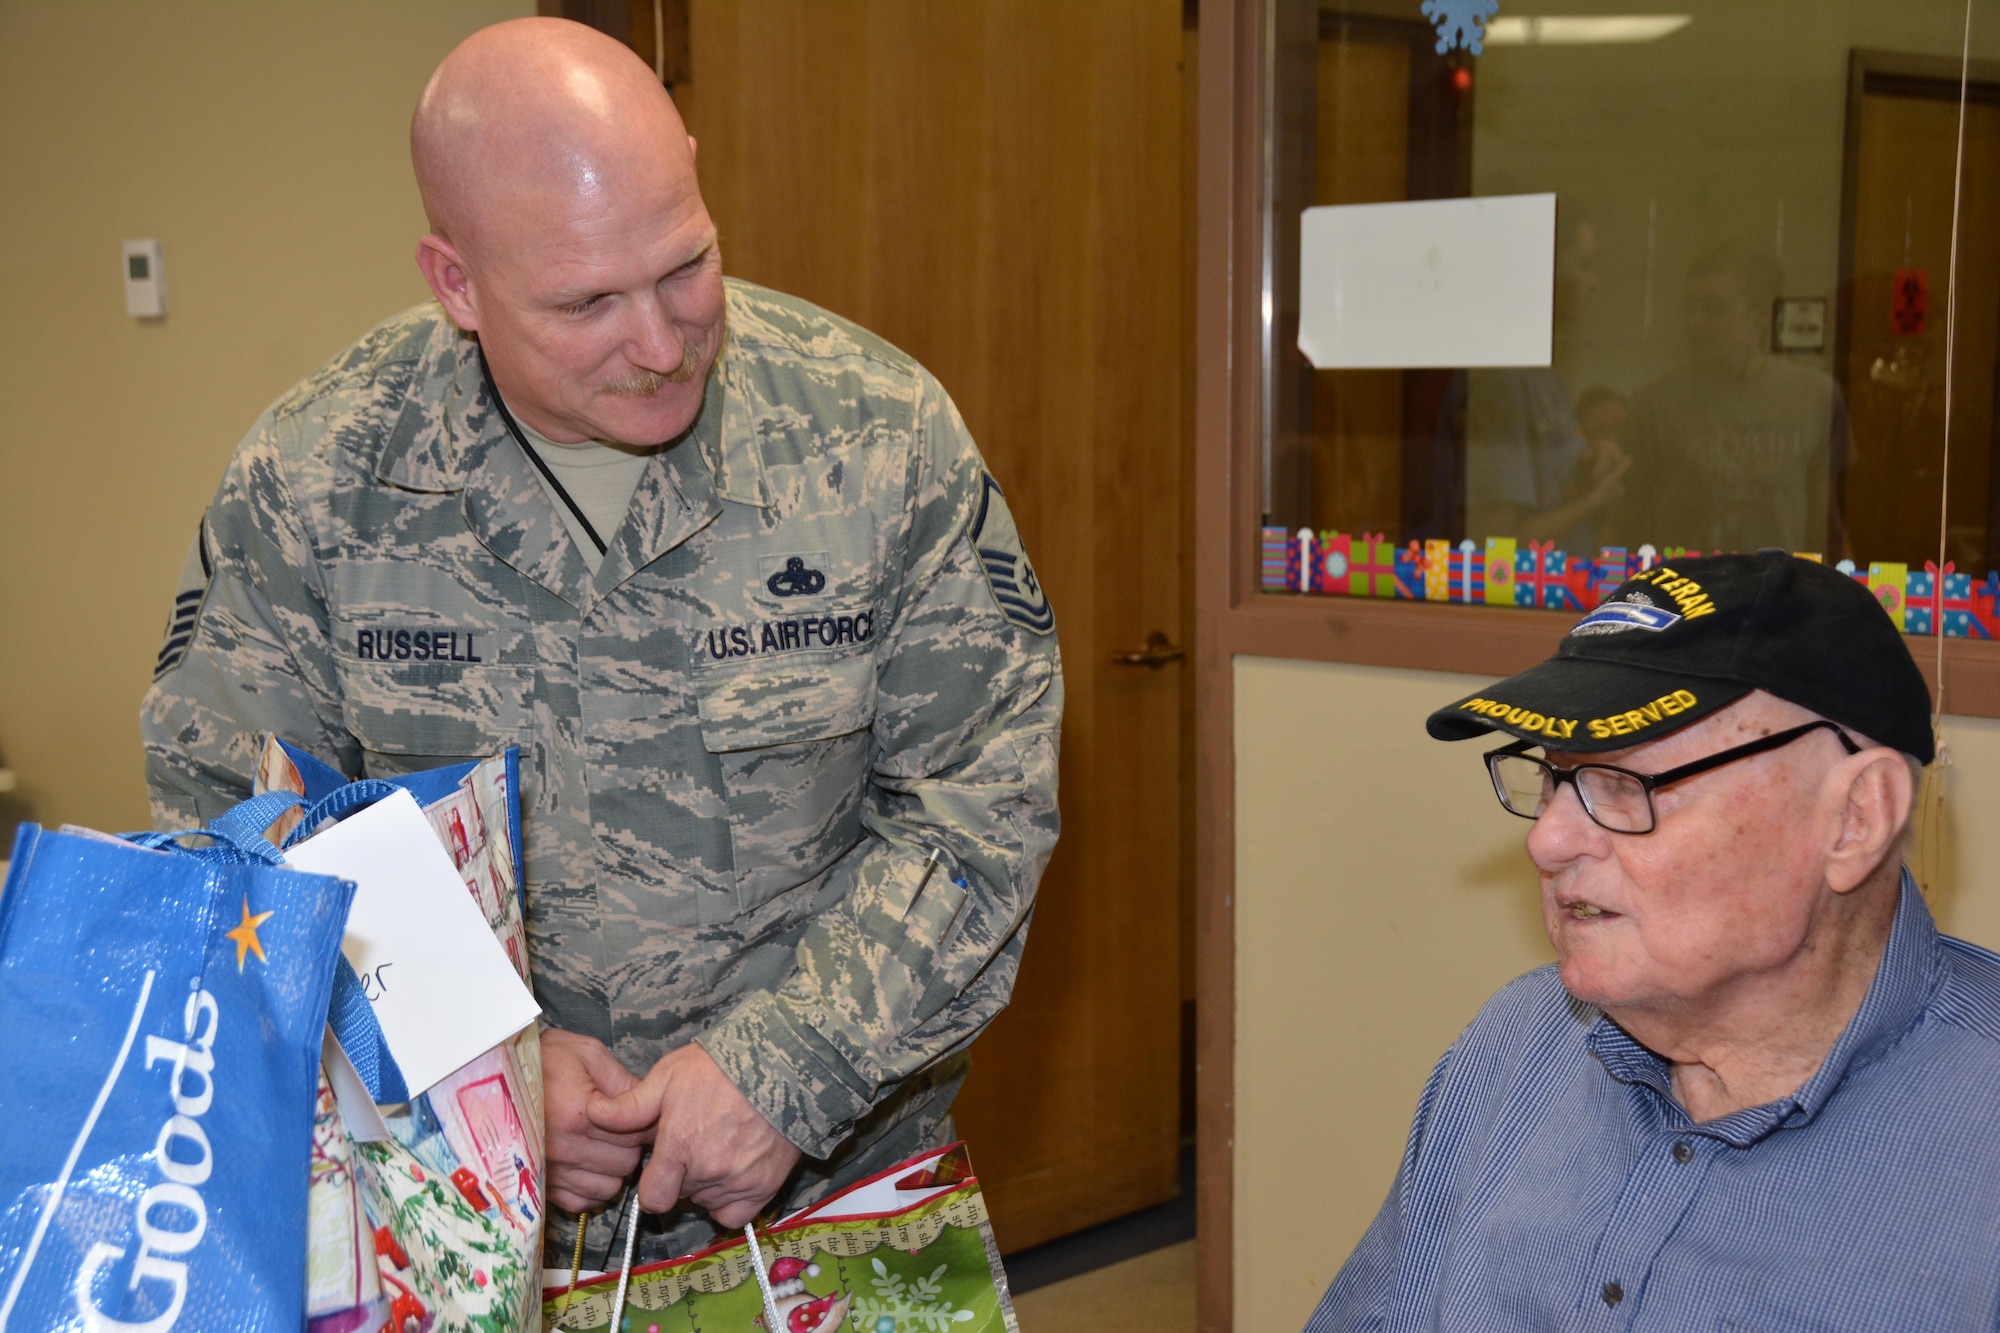 Master Sgt. Jon Russell of the 507th Maintenance Squadron delivers a gift bag and listens to Norman Veterans Center resident talk about his time in the U.S. Army Dec. 22, 2016 in Norman, Okla. (U.S. Air Force photo/Maj. Jon Quinlan)   